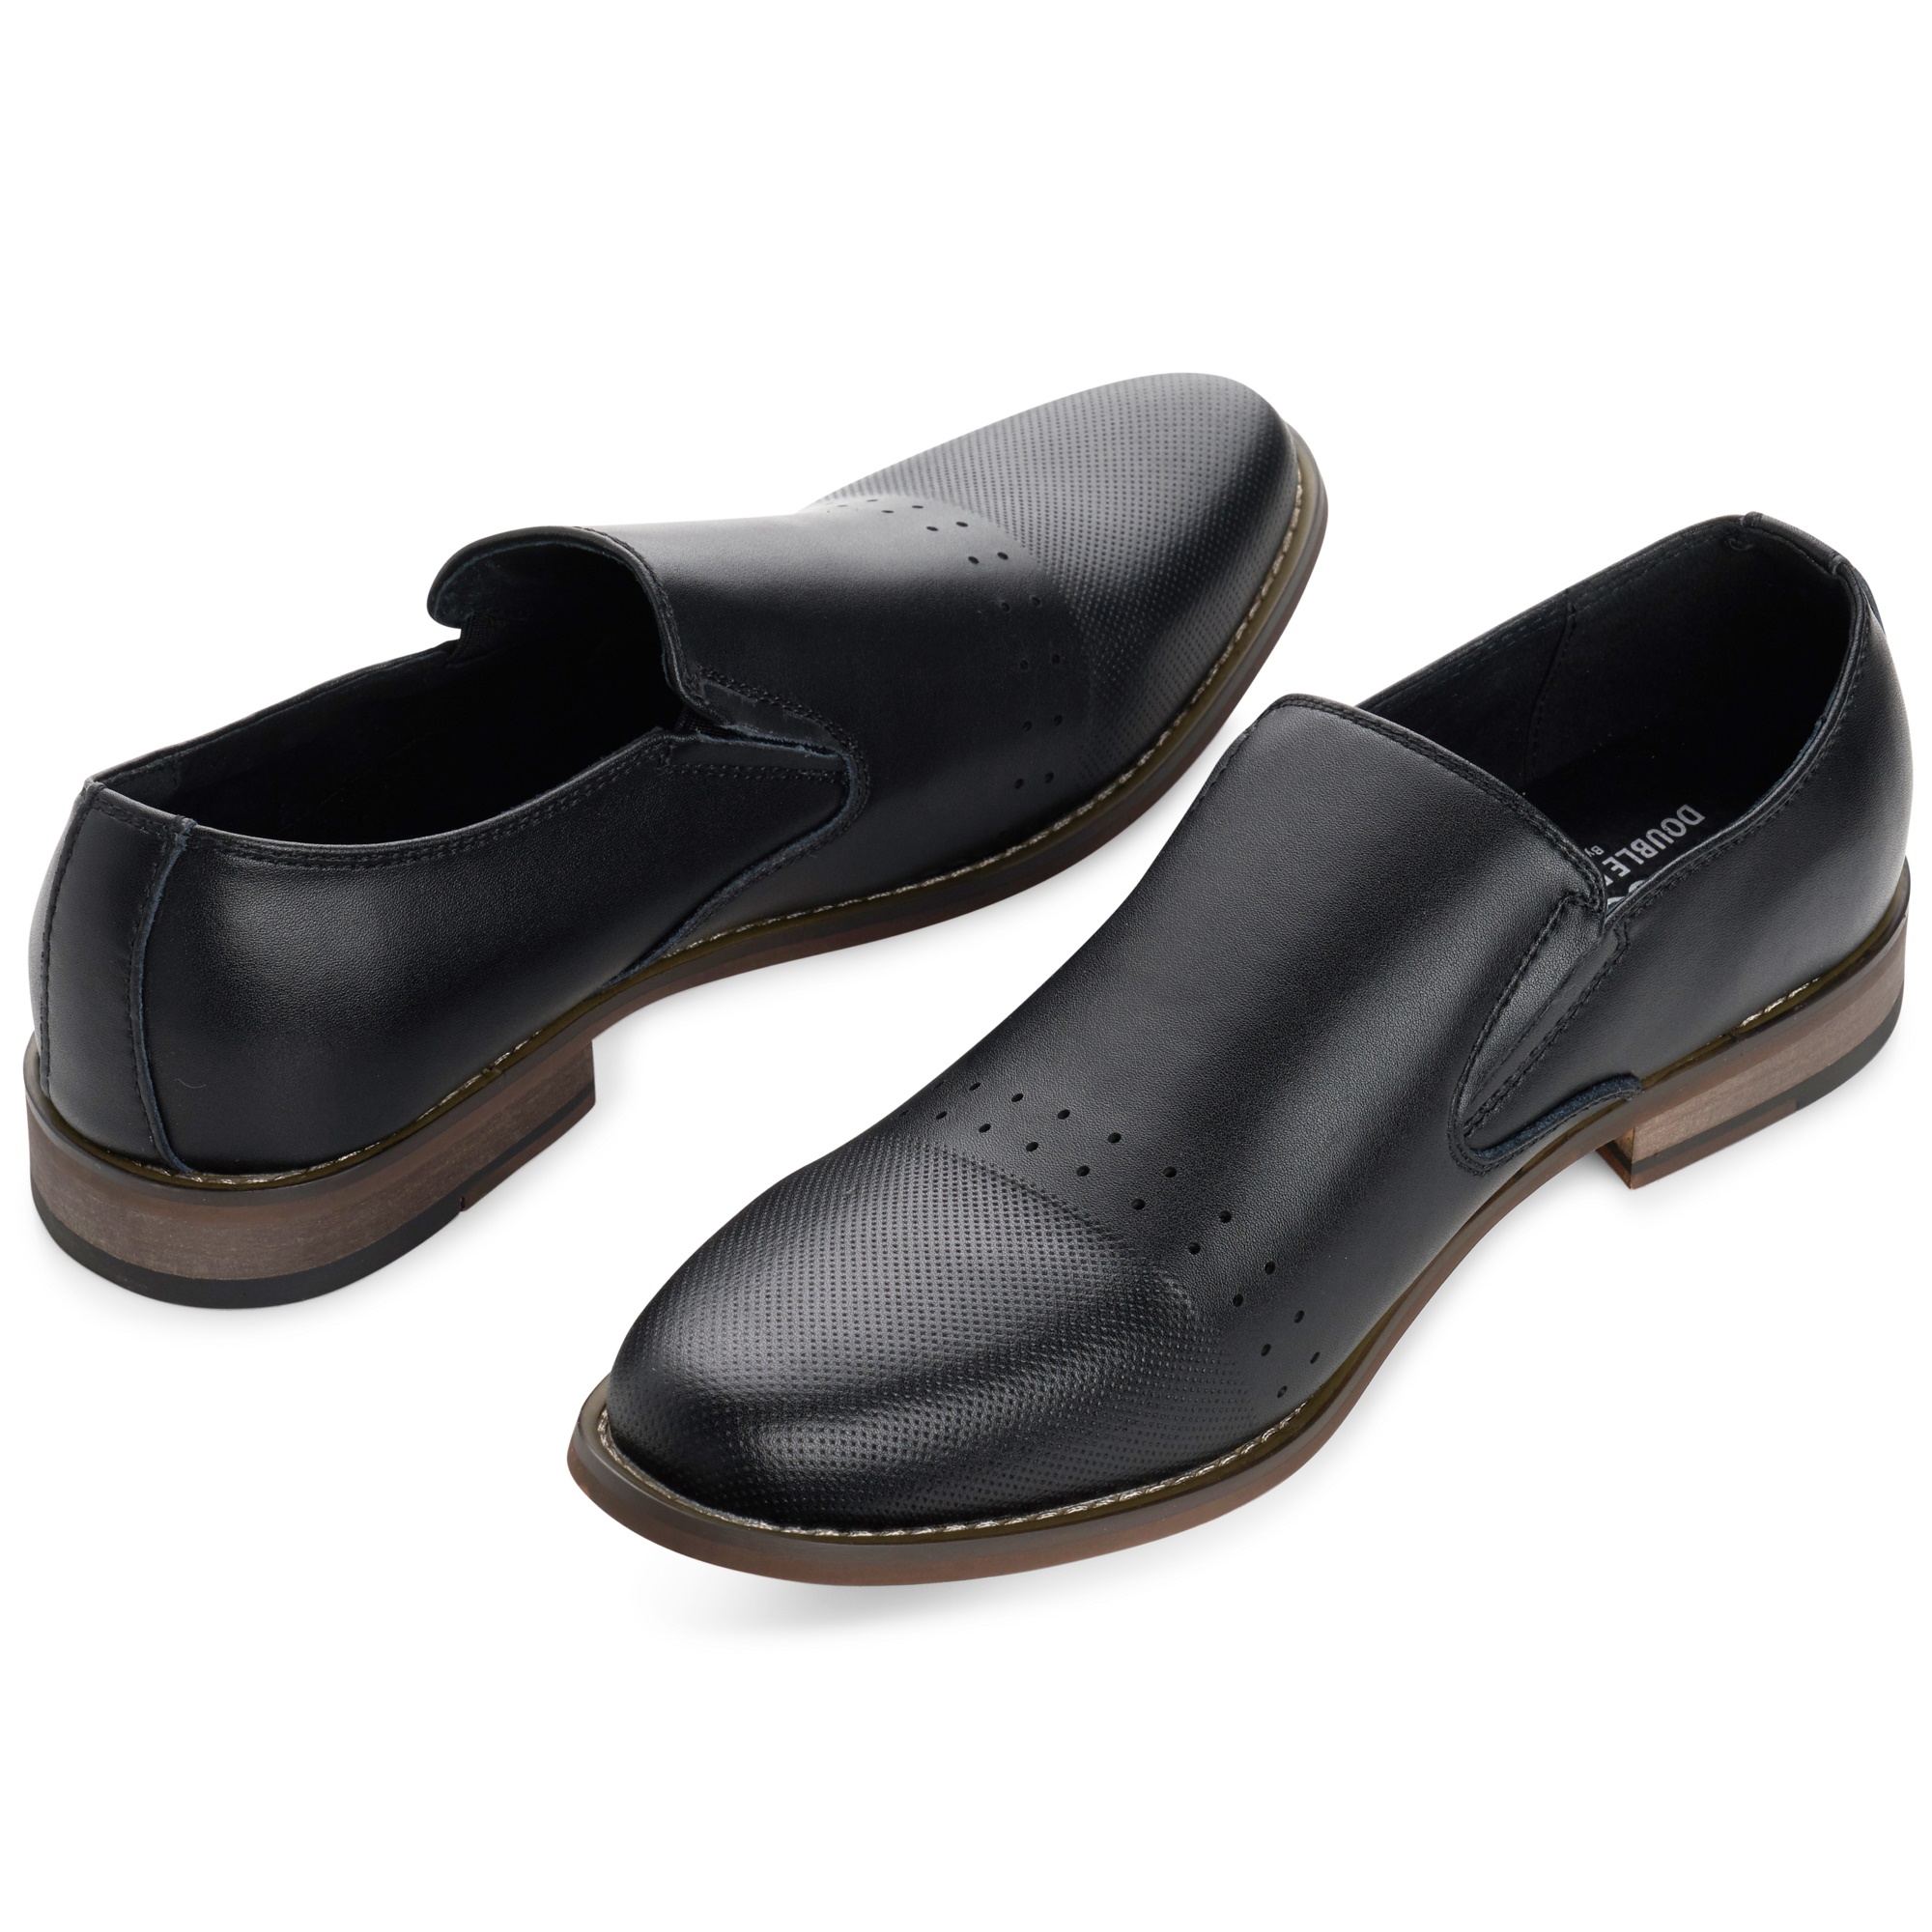 Alpine Swiss Double Diamond Mens Leather Loafers Oxford Slip-on Dress Shoes - image 4 of 7